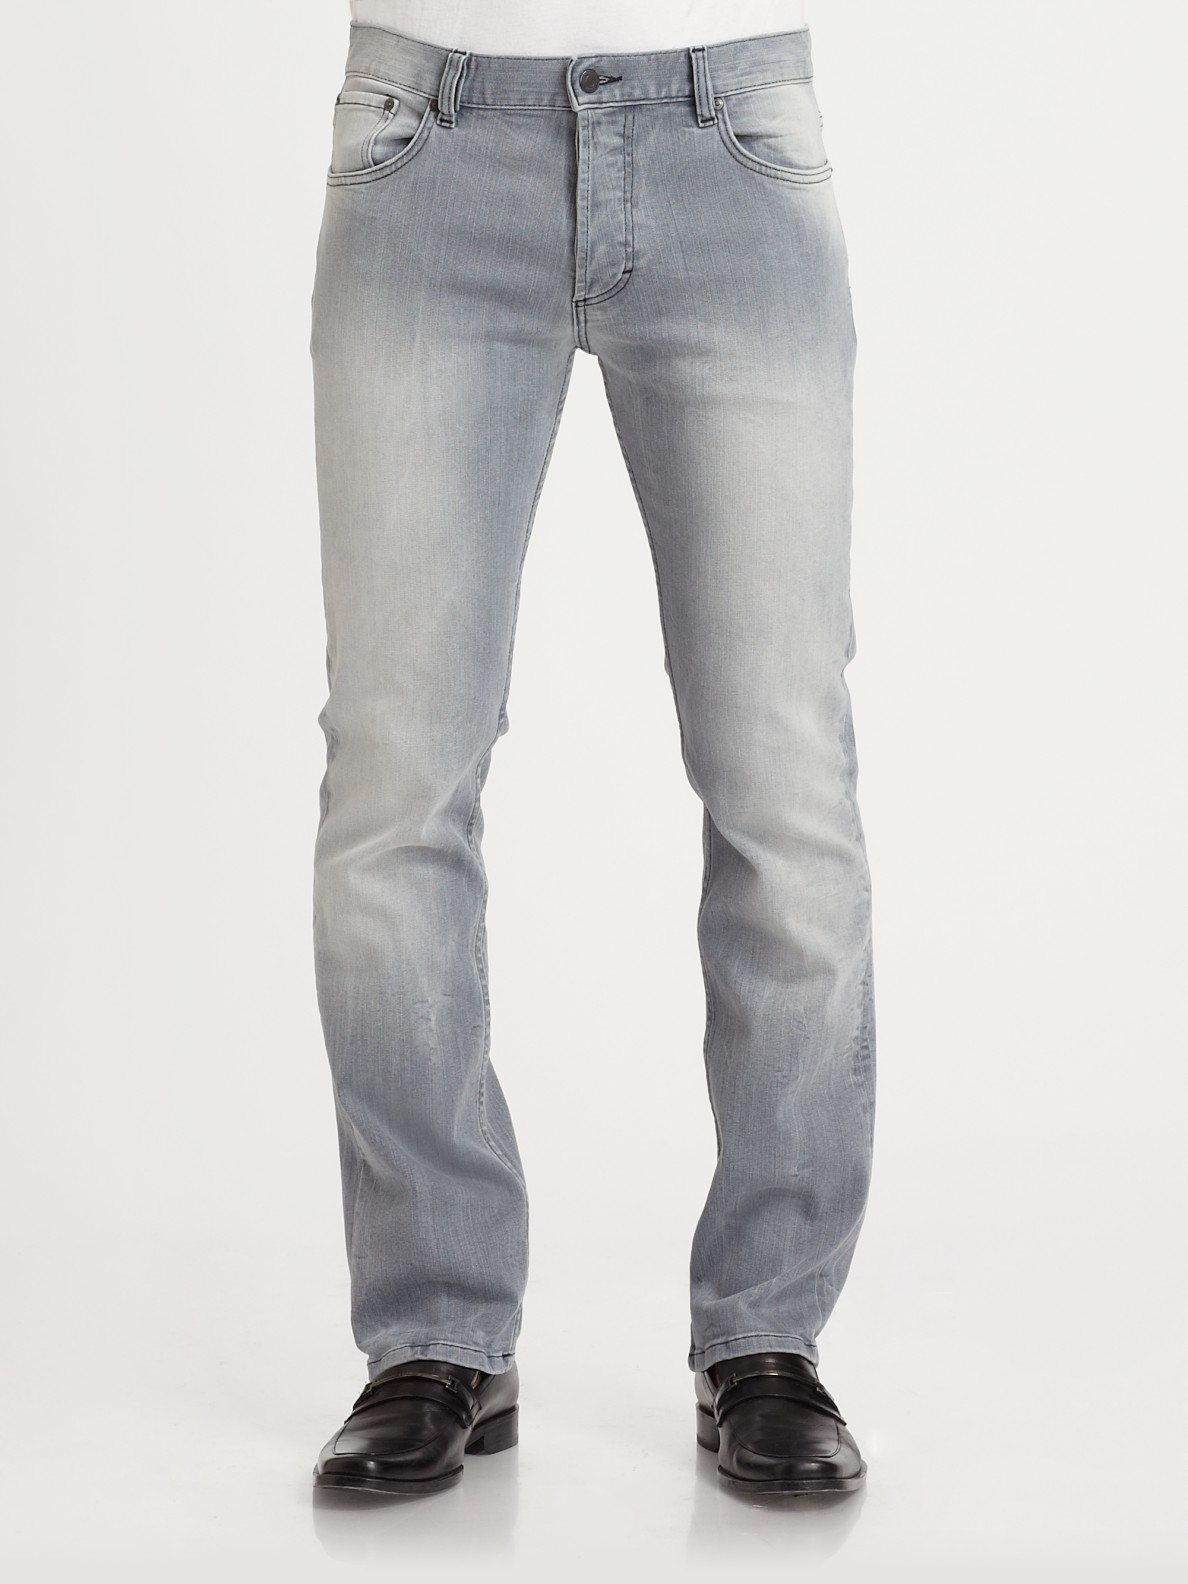 HUGO Stone Washed Denim Jeans in Grey (Gray) for Men - Lyst